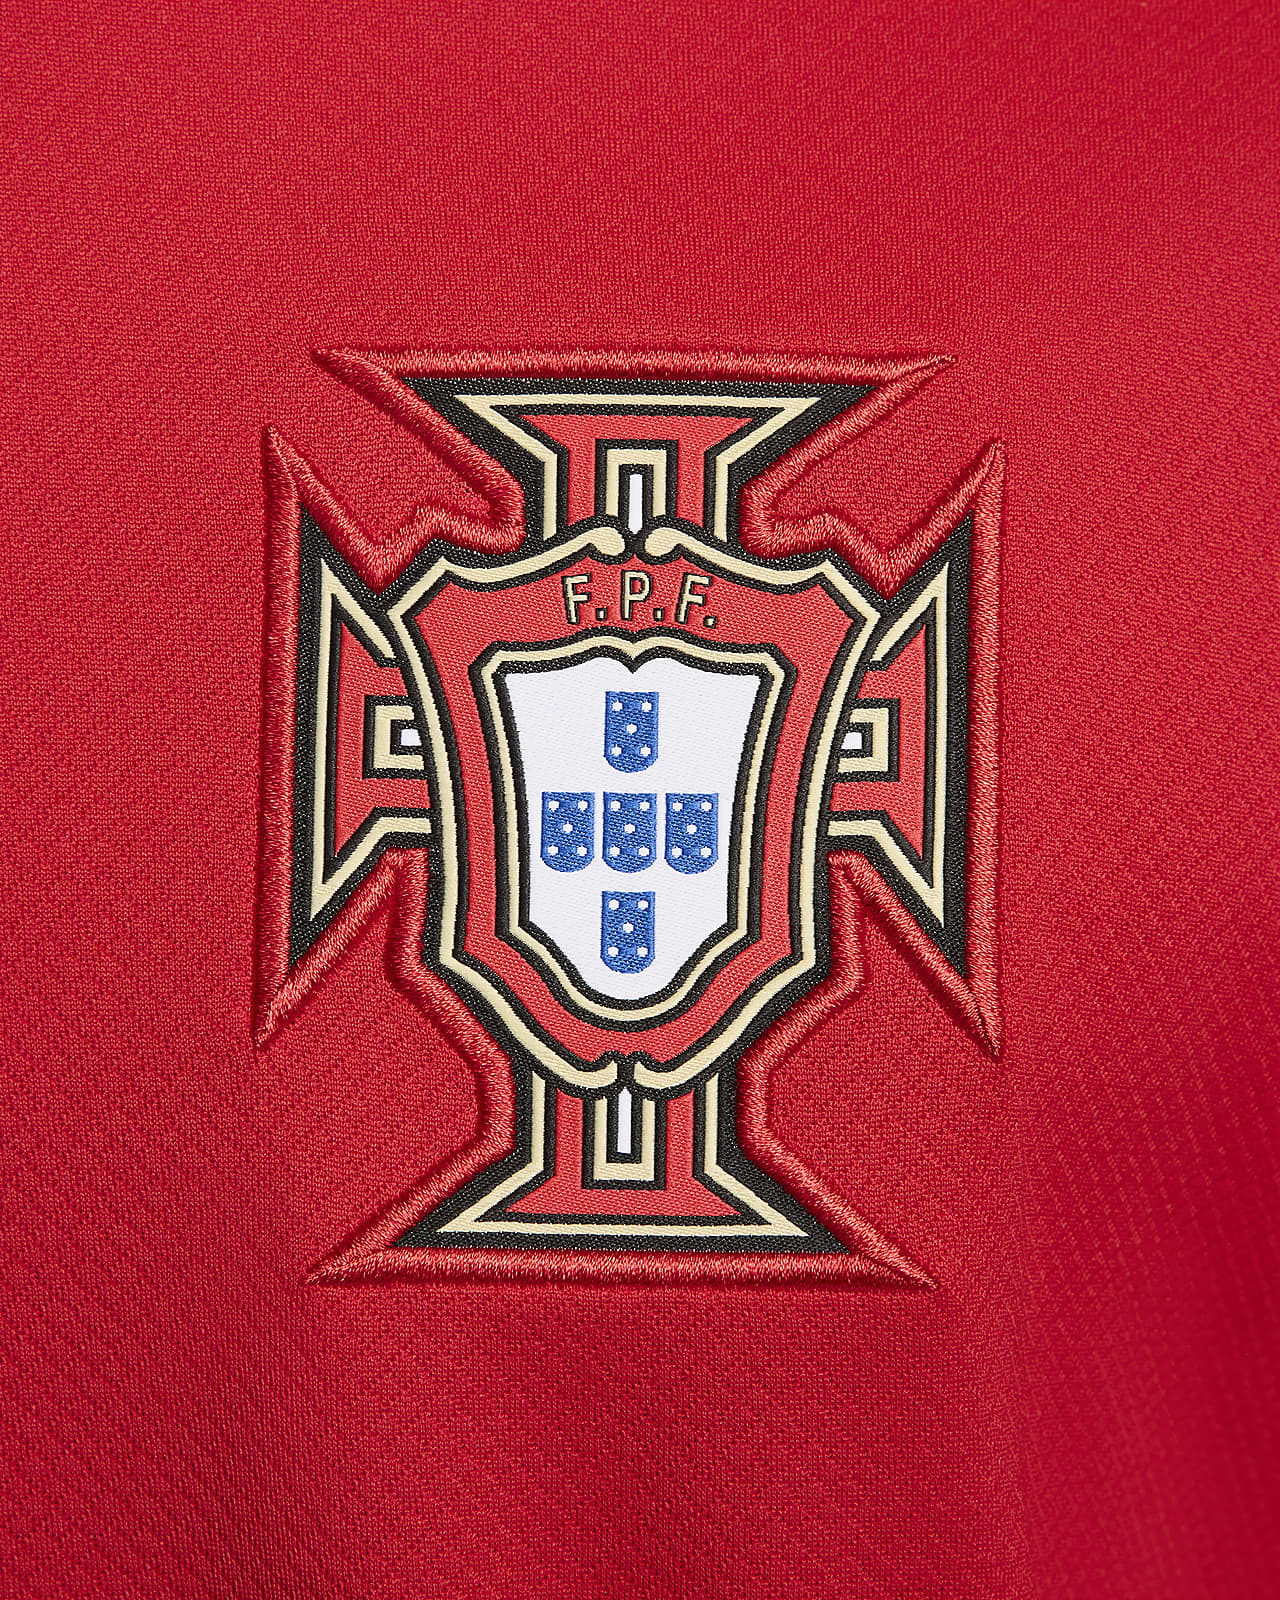 Portuguese Football Federation: Over 20 Royalty-Free Licensable Stock  Illustrations & Drawings | Shutterstock